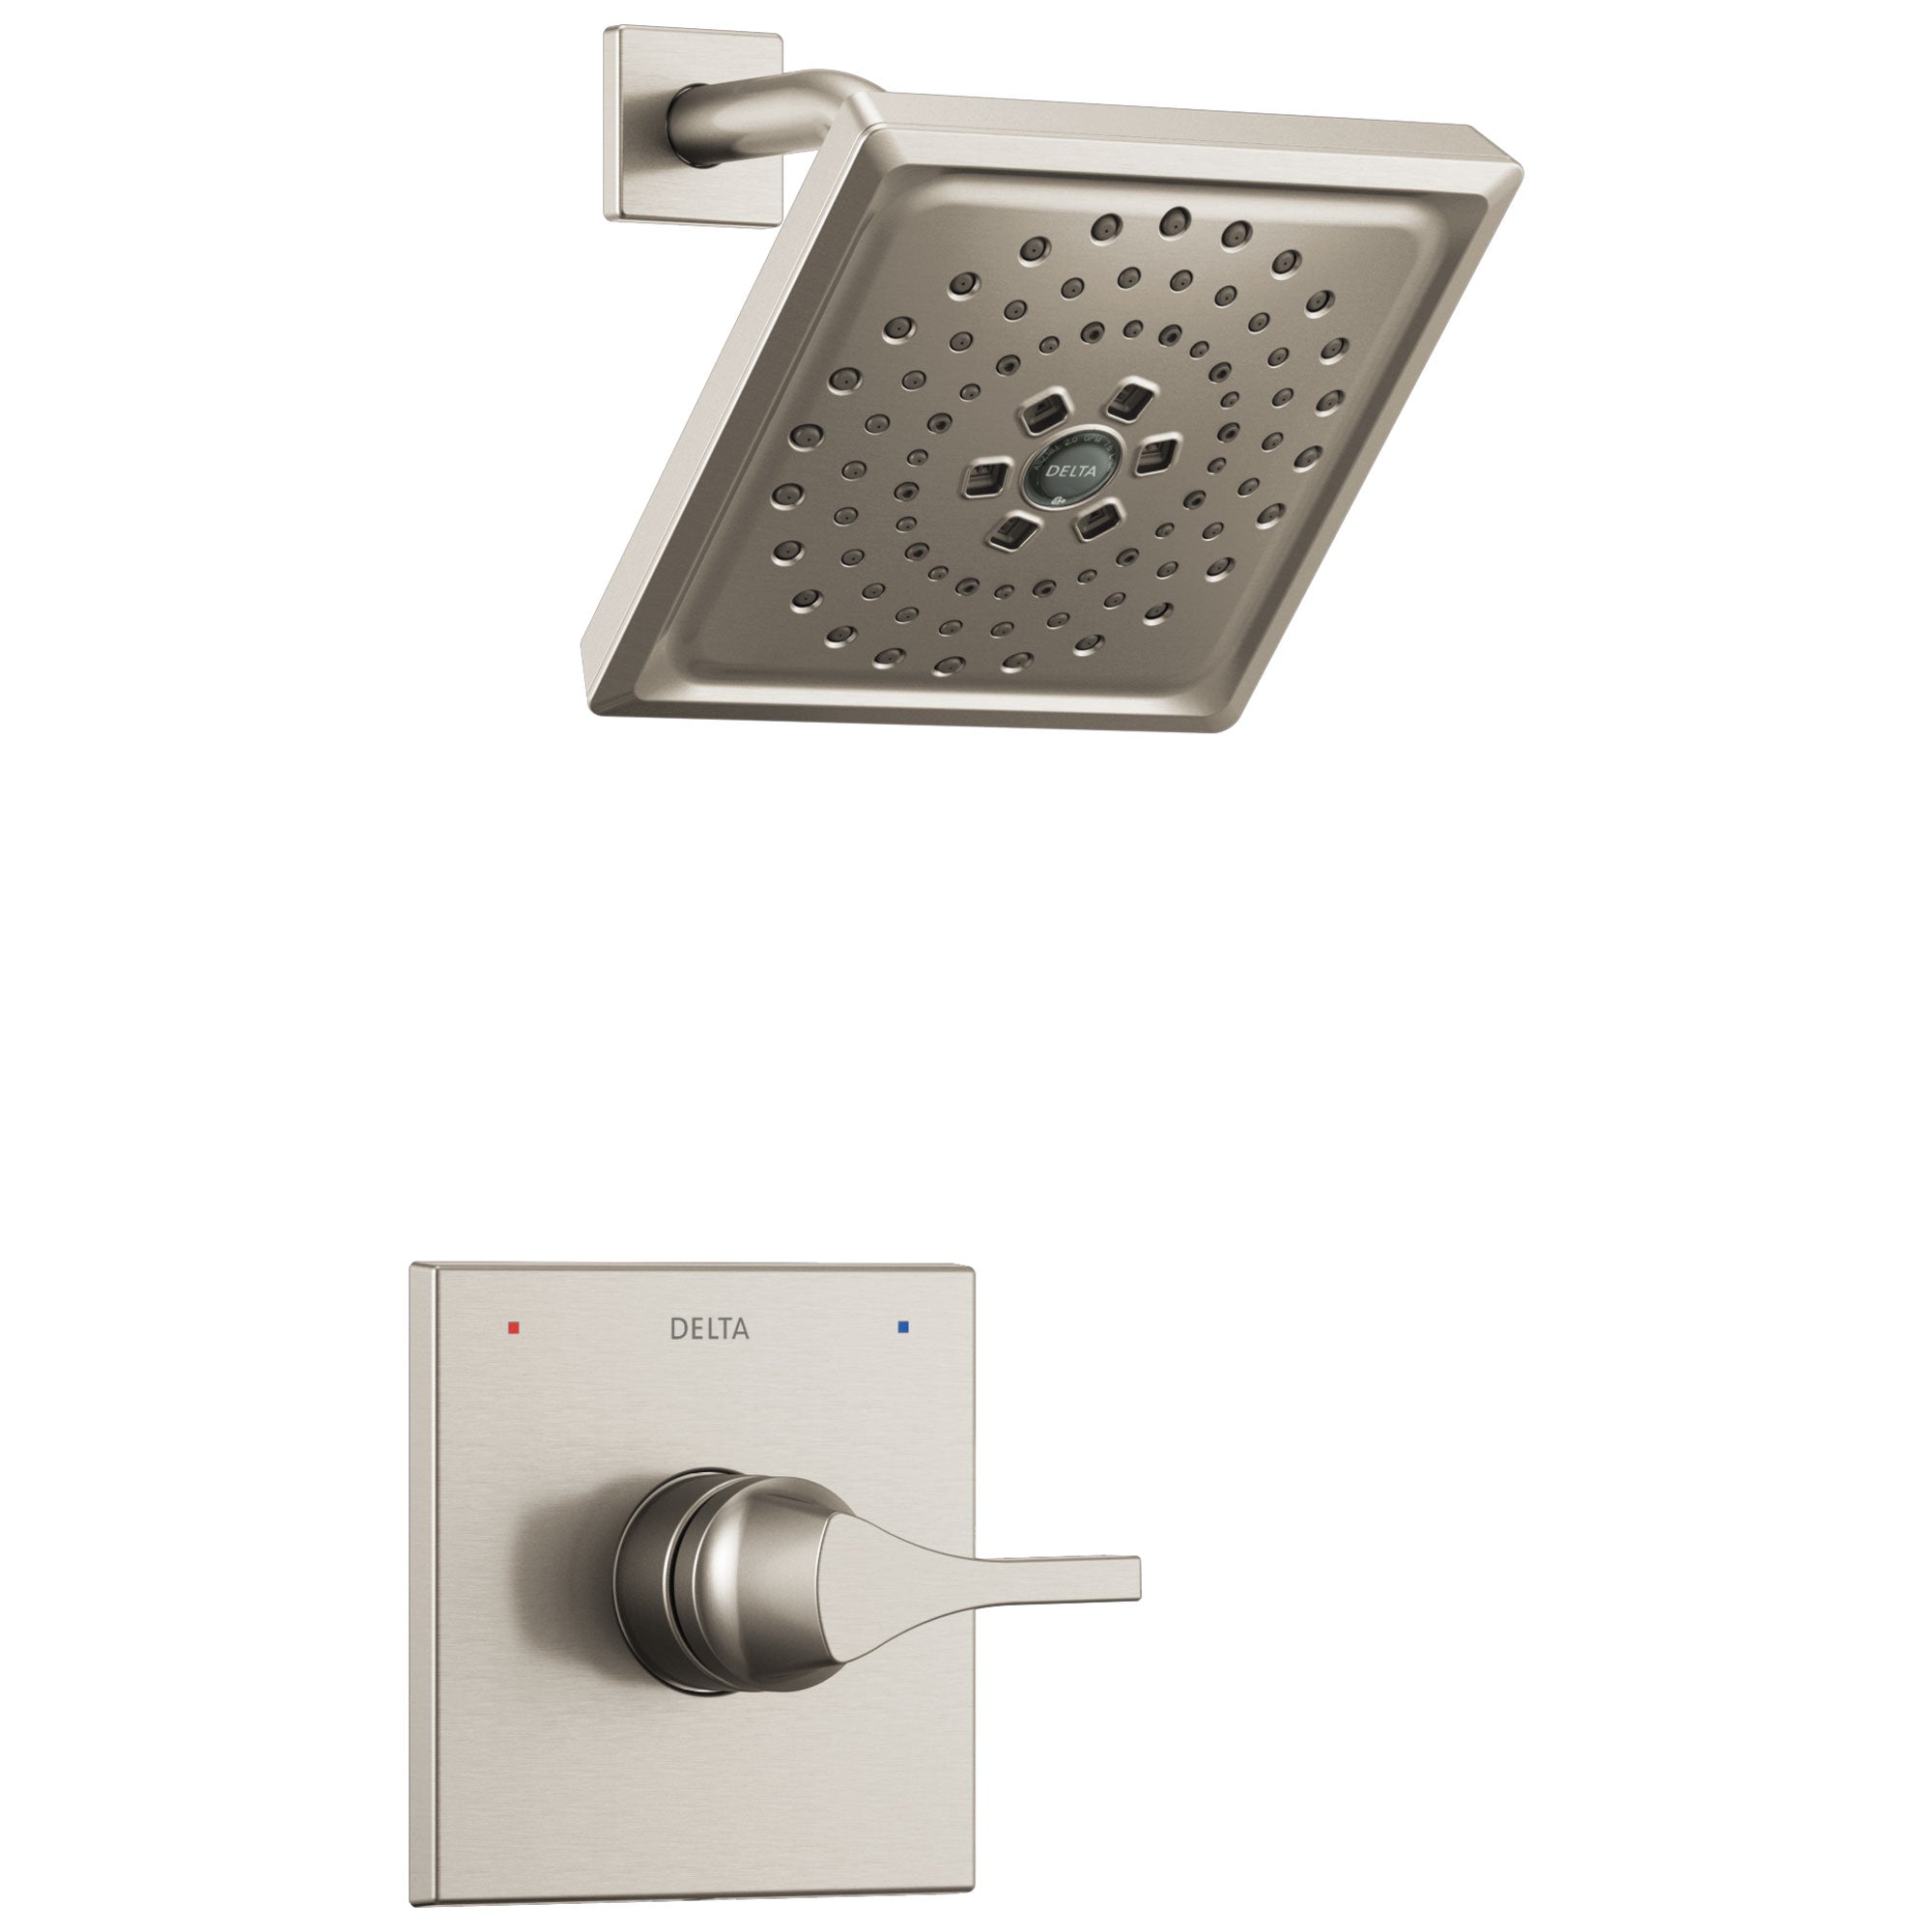 Delta Zura Collection Stainless Steel Finish Modern Single Handle Monitor 14 Shower only Faucet Includes Trim Kit and Rough-in Valve without Stops D2024V